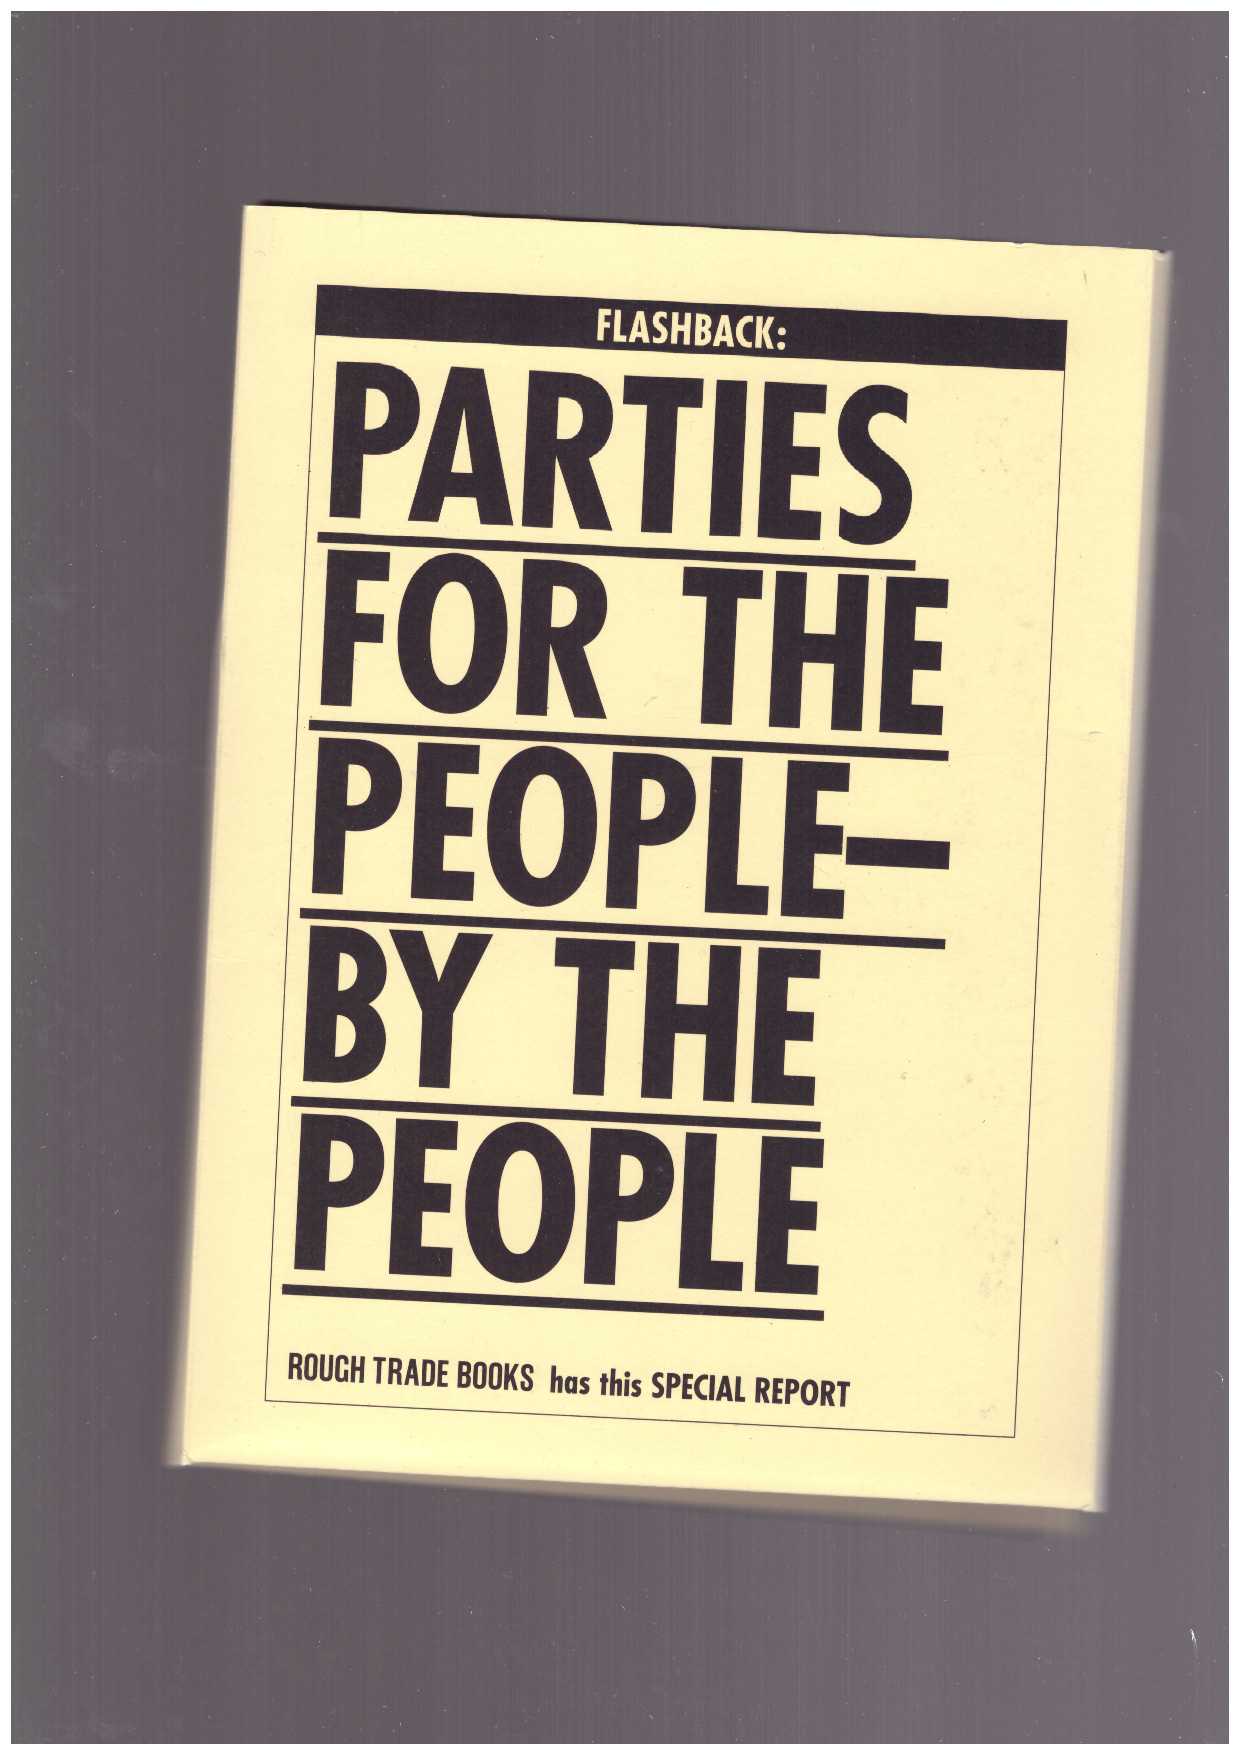 WOOD, Anna; STRIPE, Adele - Flashback - Parties for the People by the People